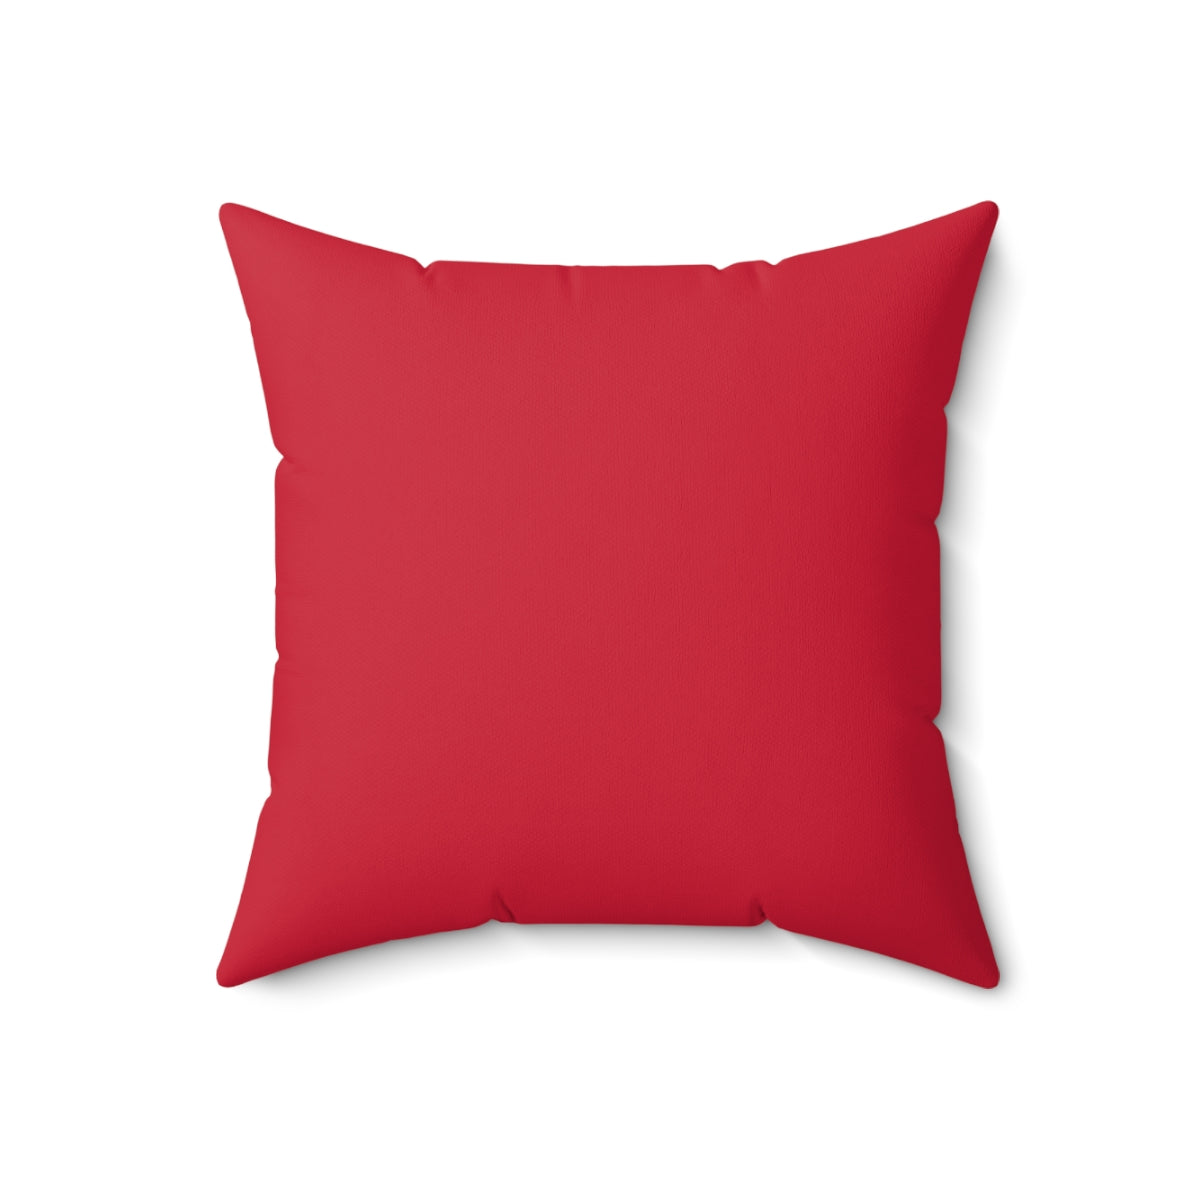 ALICE CUSHION - RED QUEEN